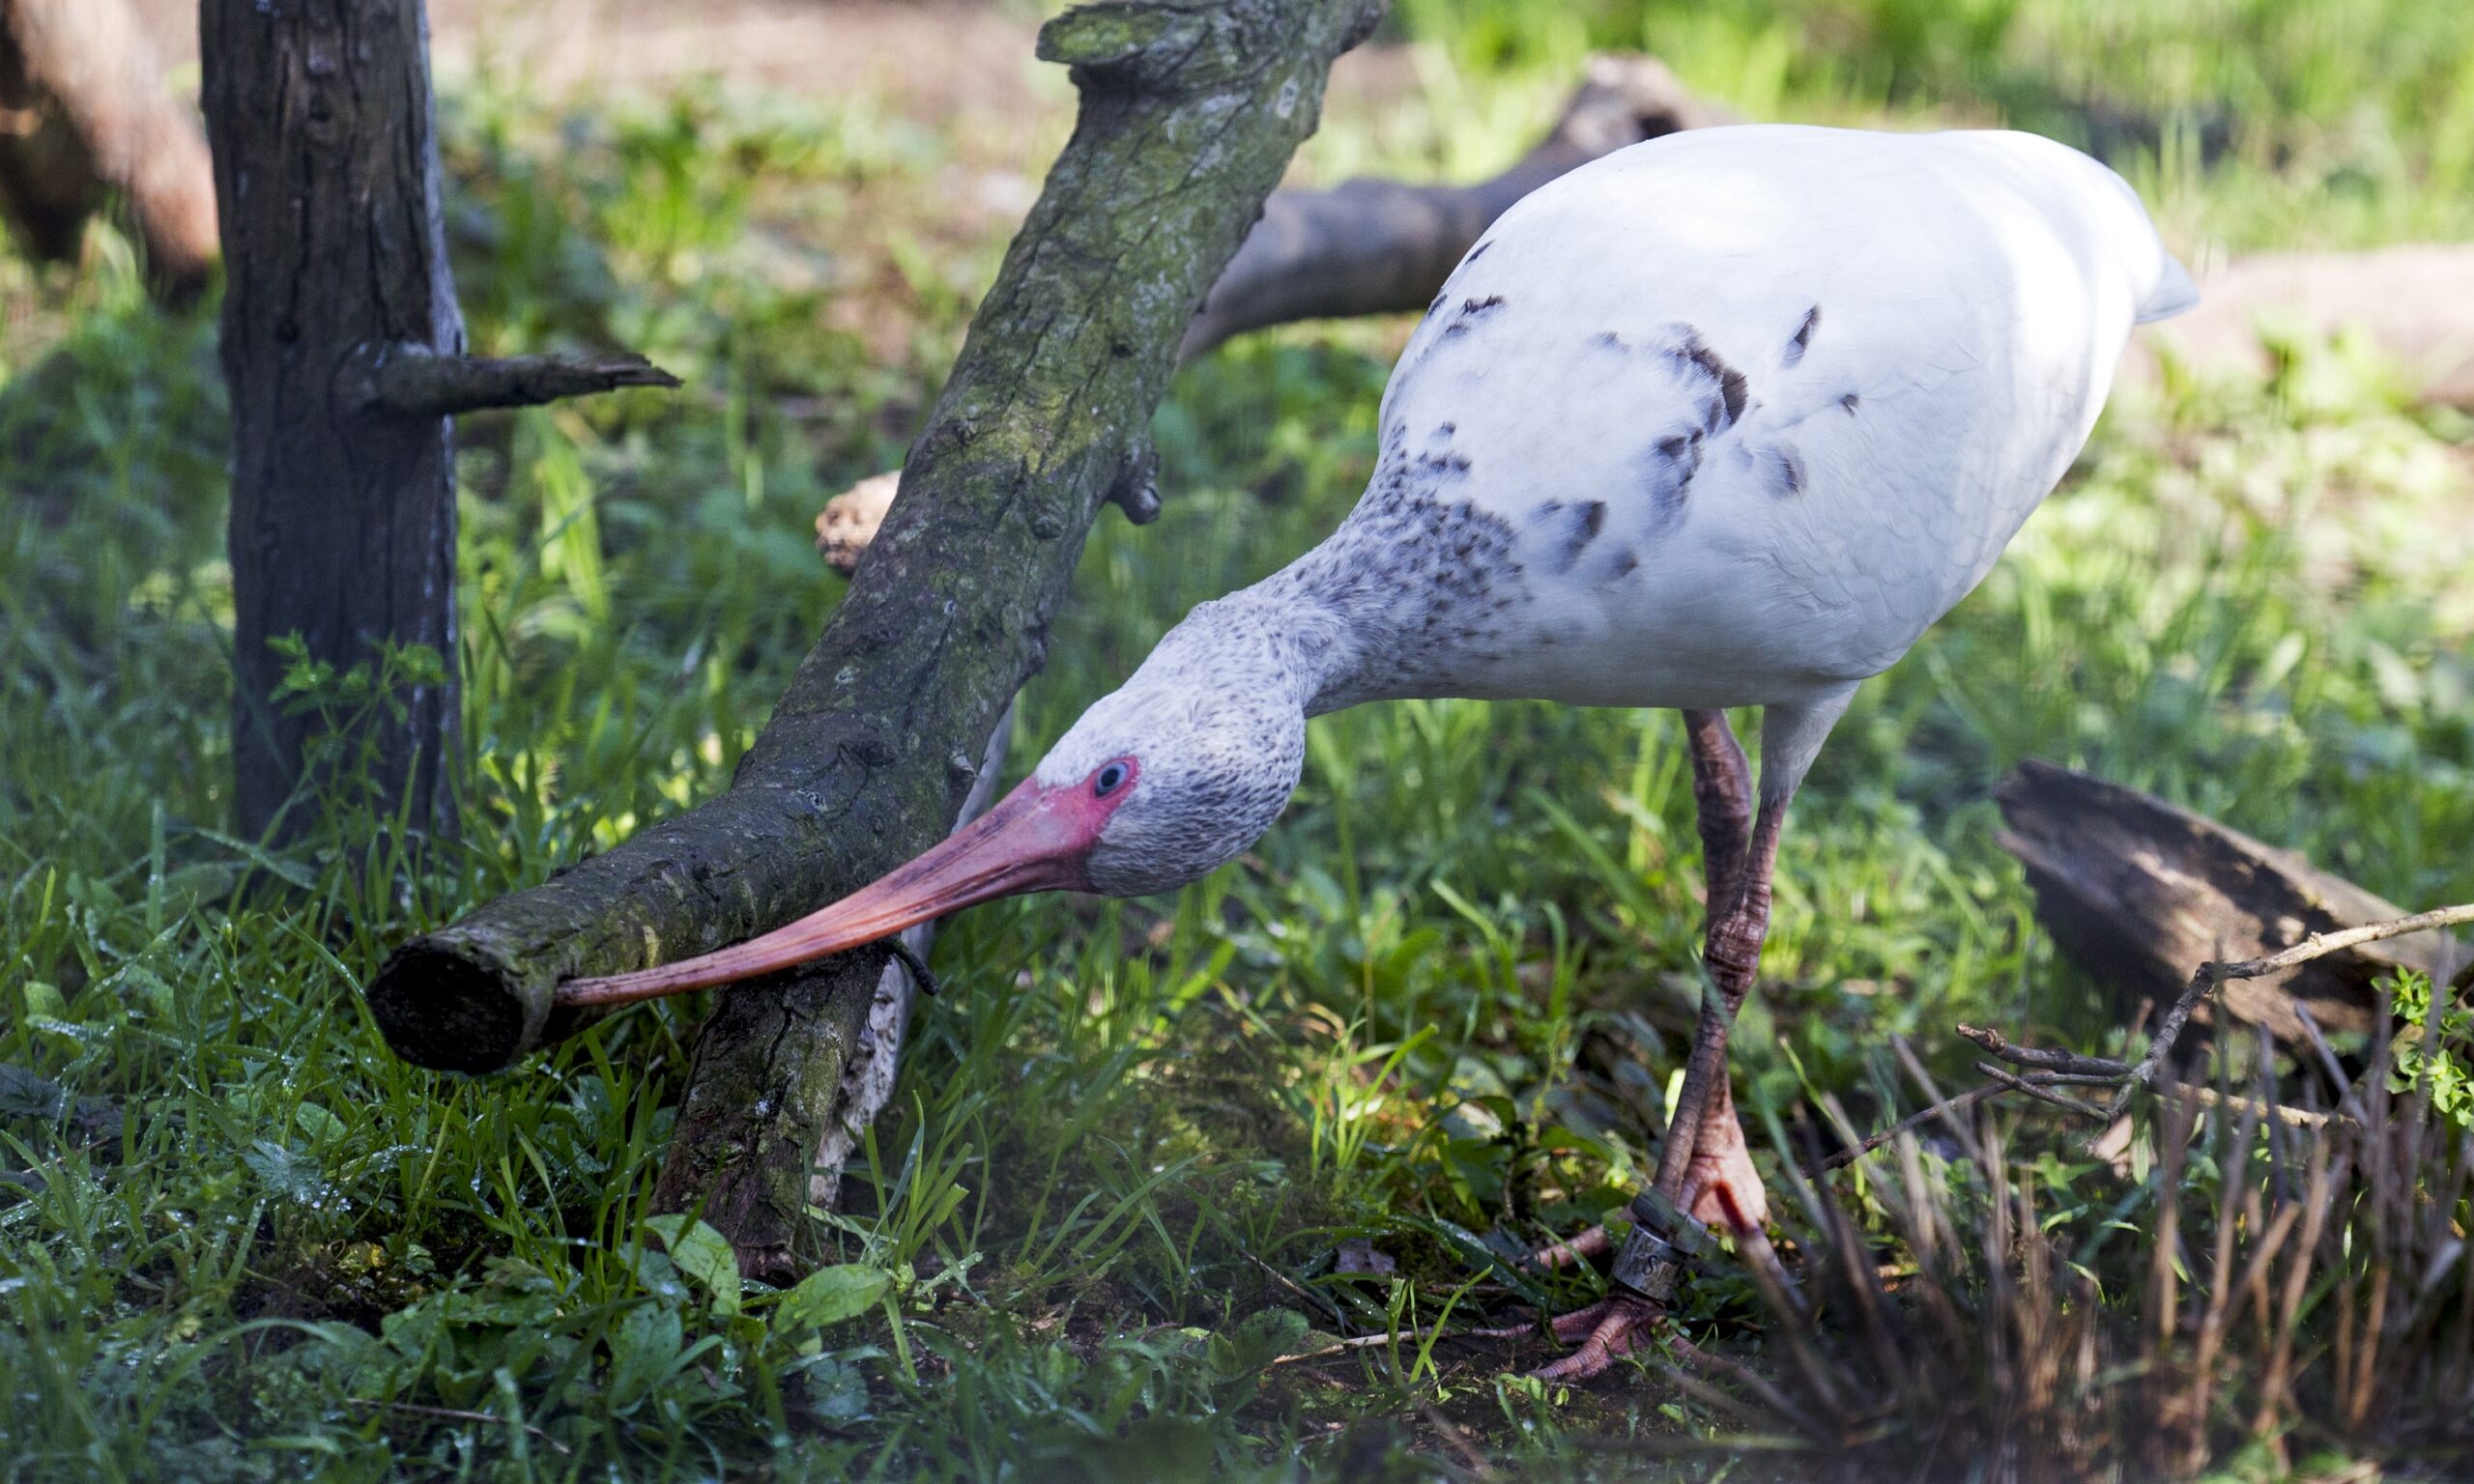 https://www.sfzoo.org/wp-content/uploads/2021/03/White-Ibis-3-MH-scaled.jpg